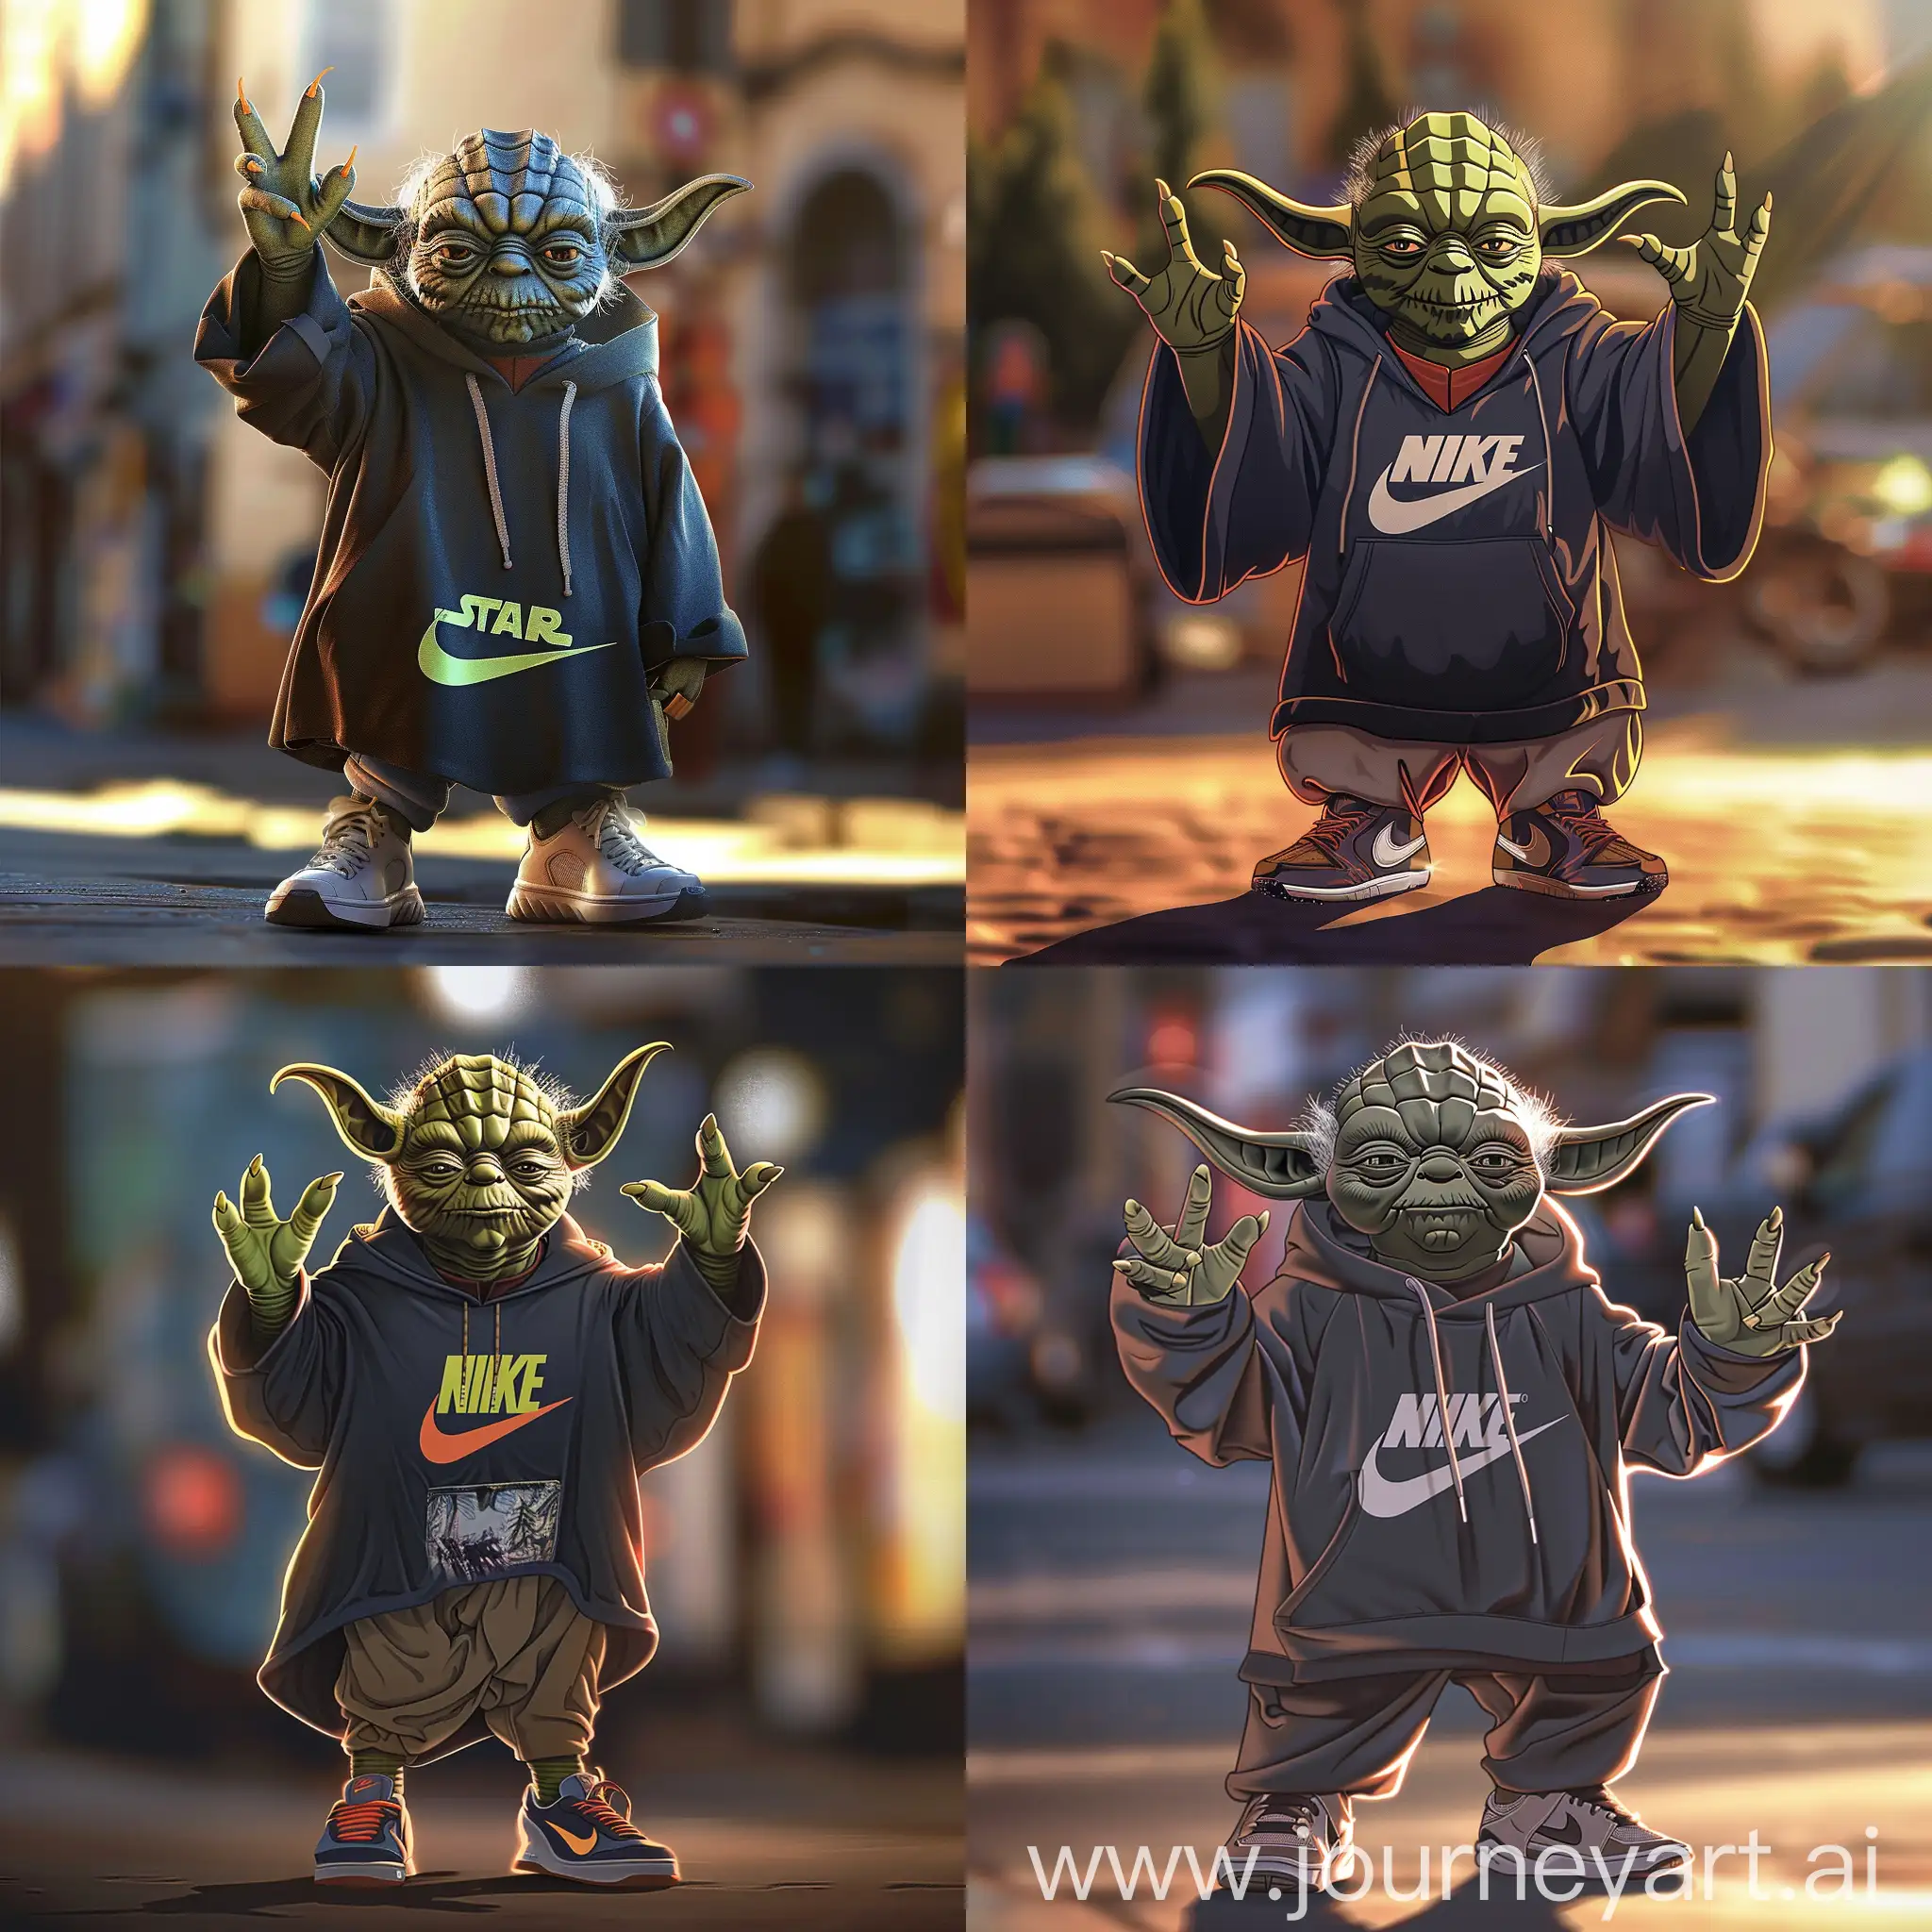 Modern-Yoda-Confident-Jedi-Master-in-Nike-Hoodie-and-Sneakers